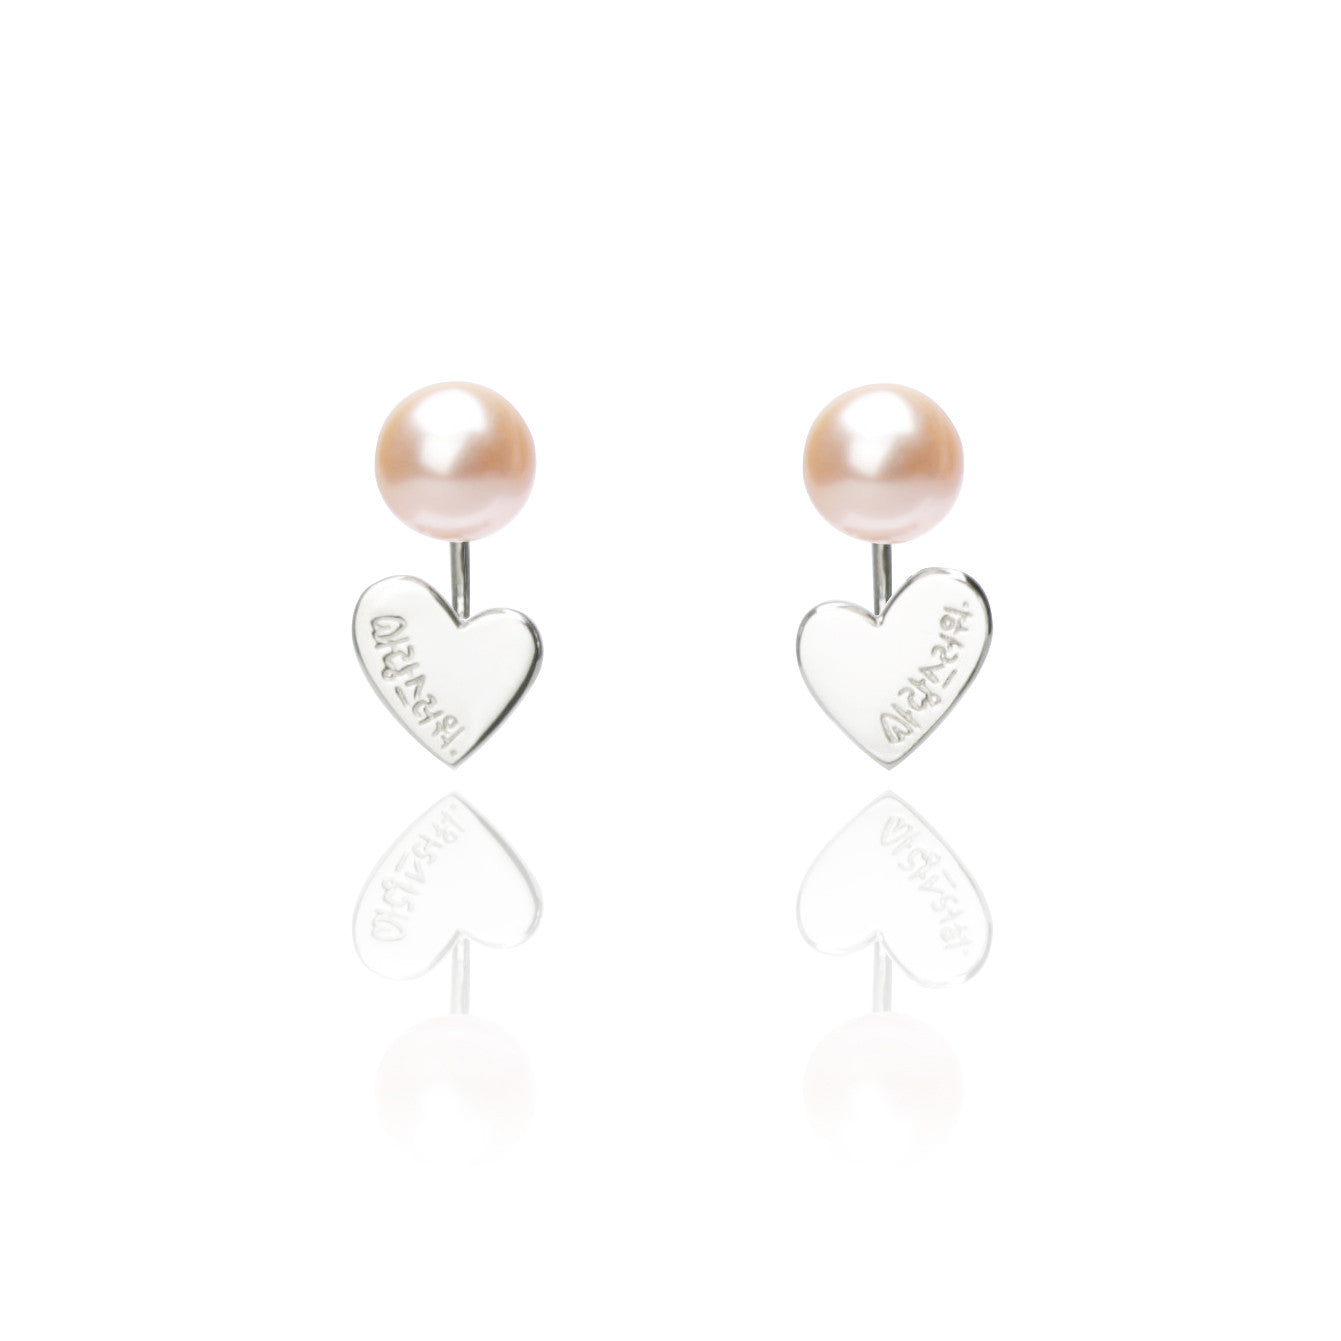 You are Lovely Earrings Peach Pearl